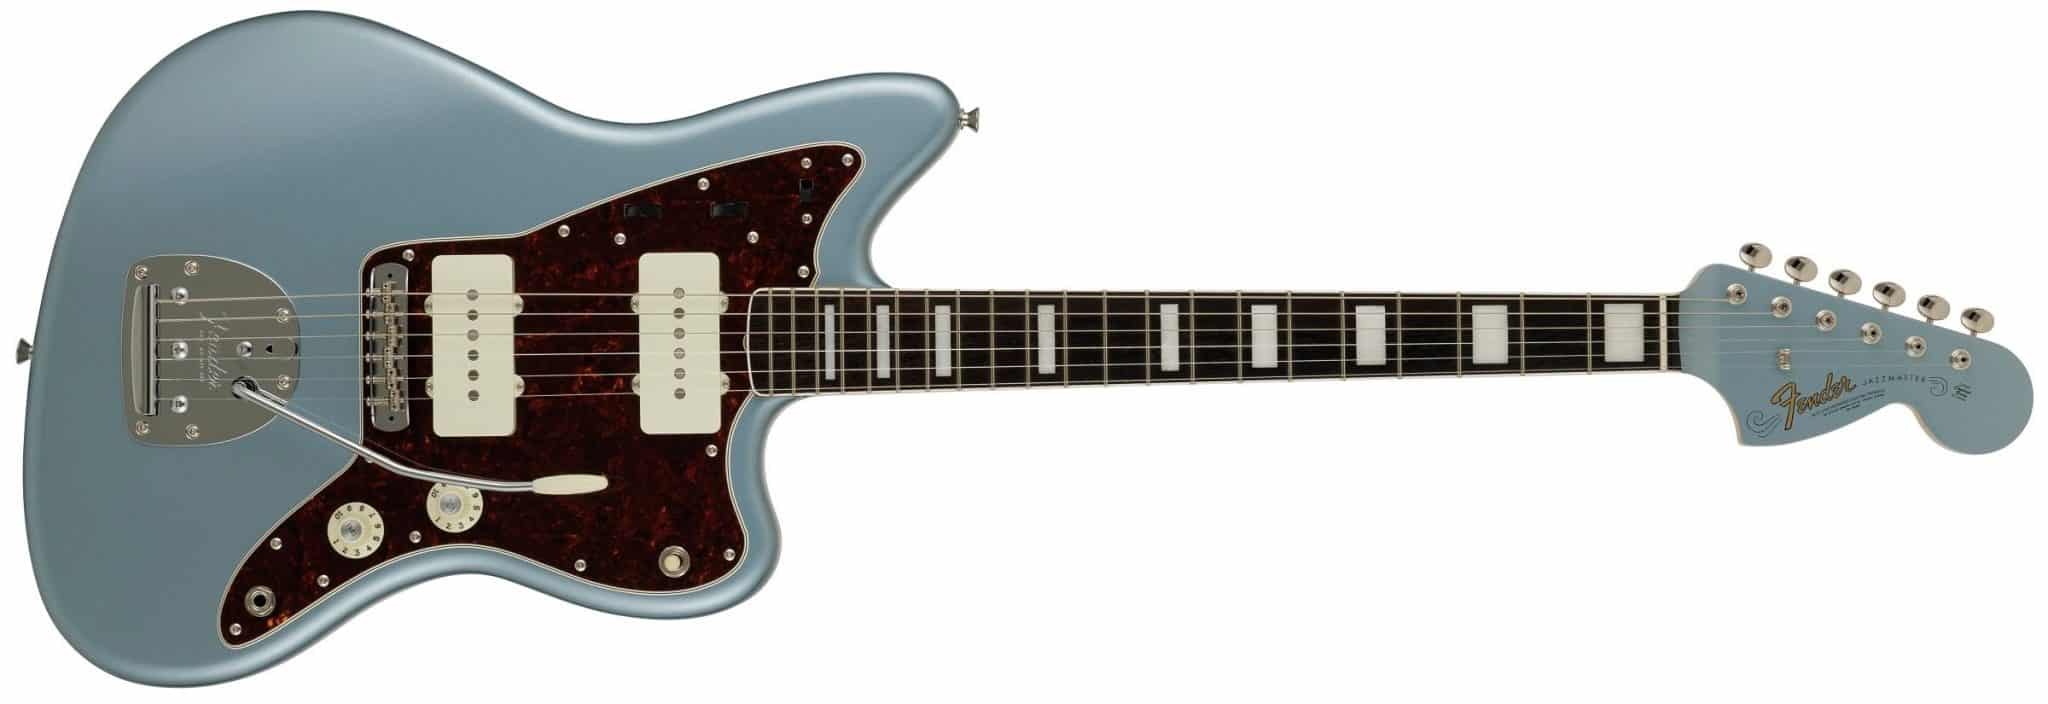 Traditional Late 60s Jazzmaster